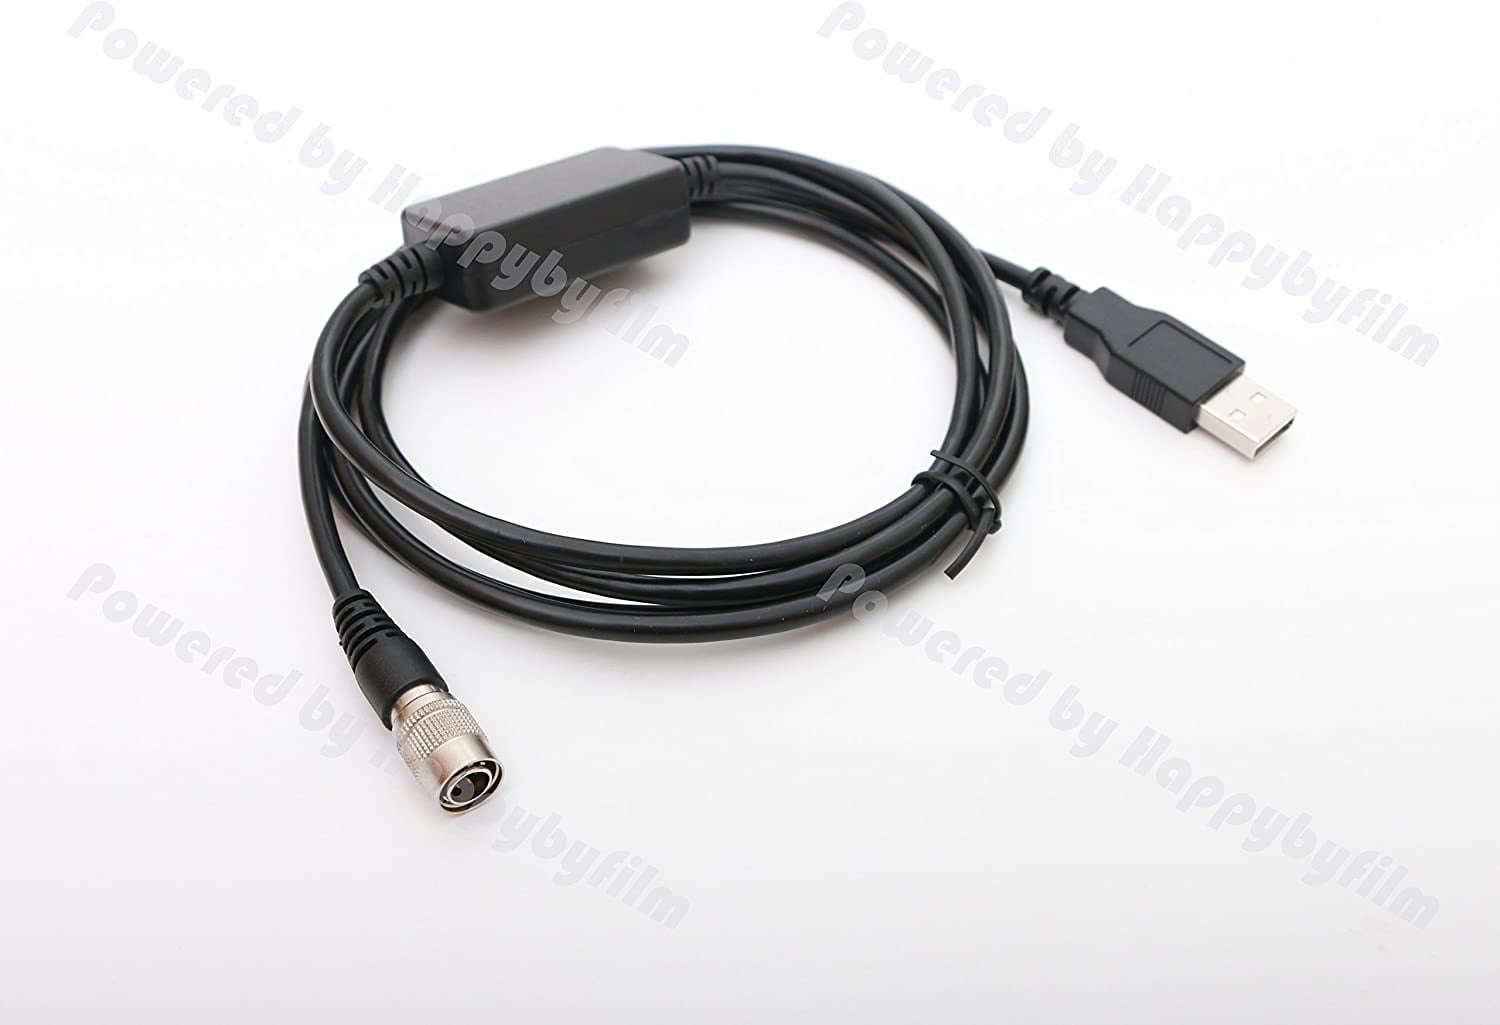 USB Data Cable with 6pin Hirose Male Plug for Nikon DTM532,DTM522,DTM452,DTM330,NIVO Total Stations